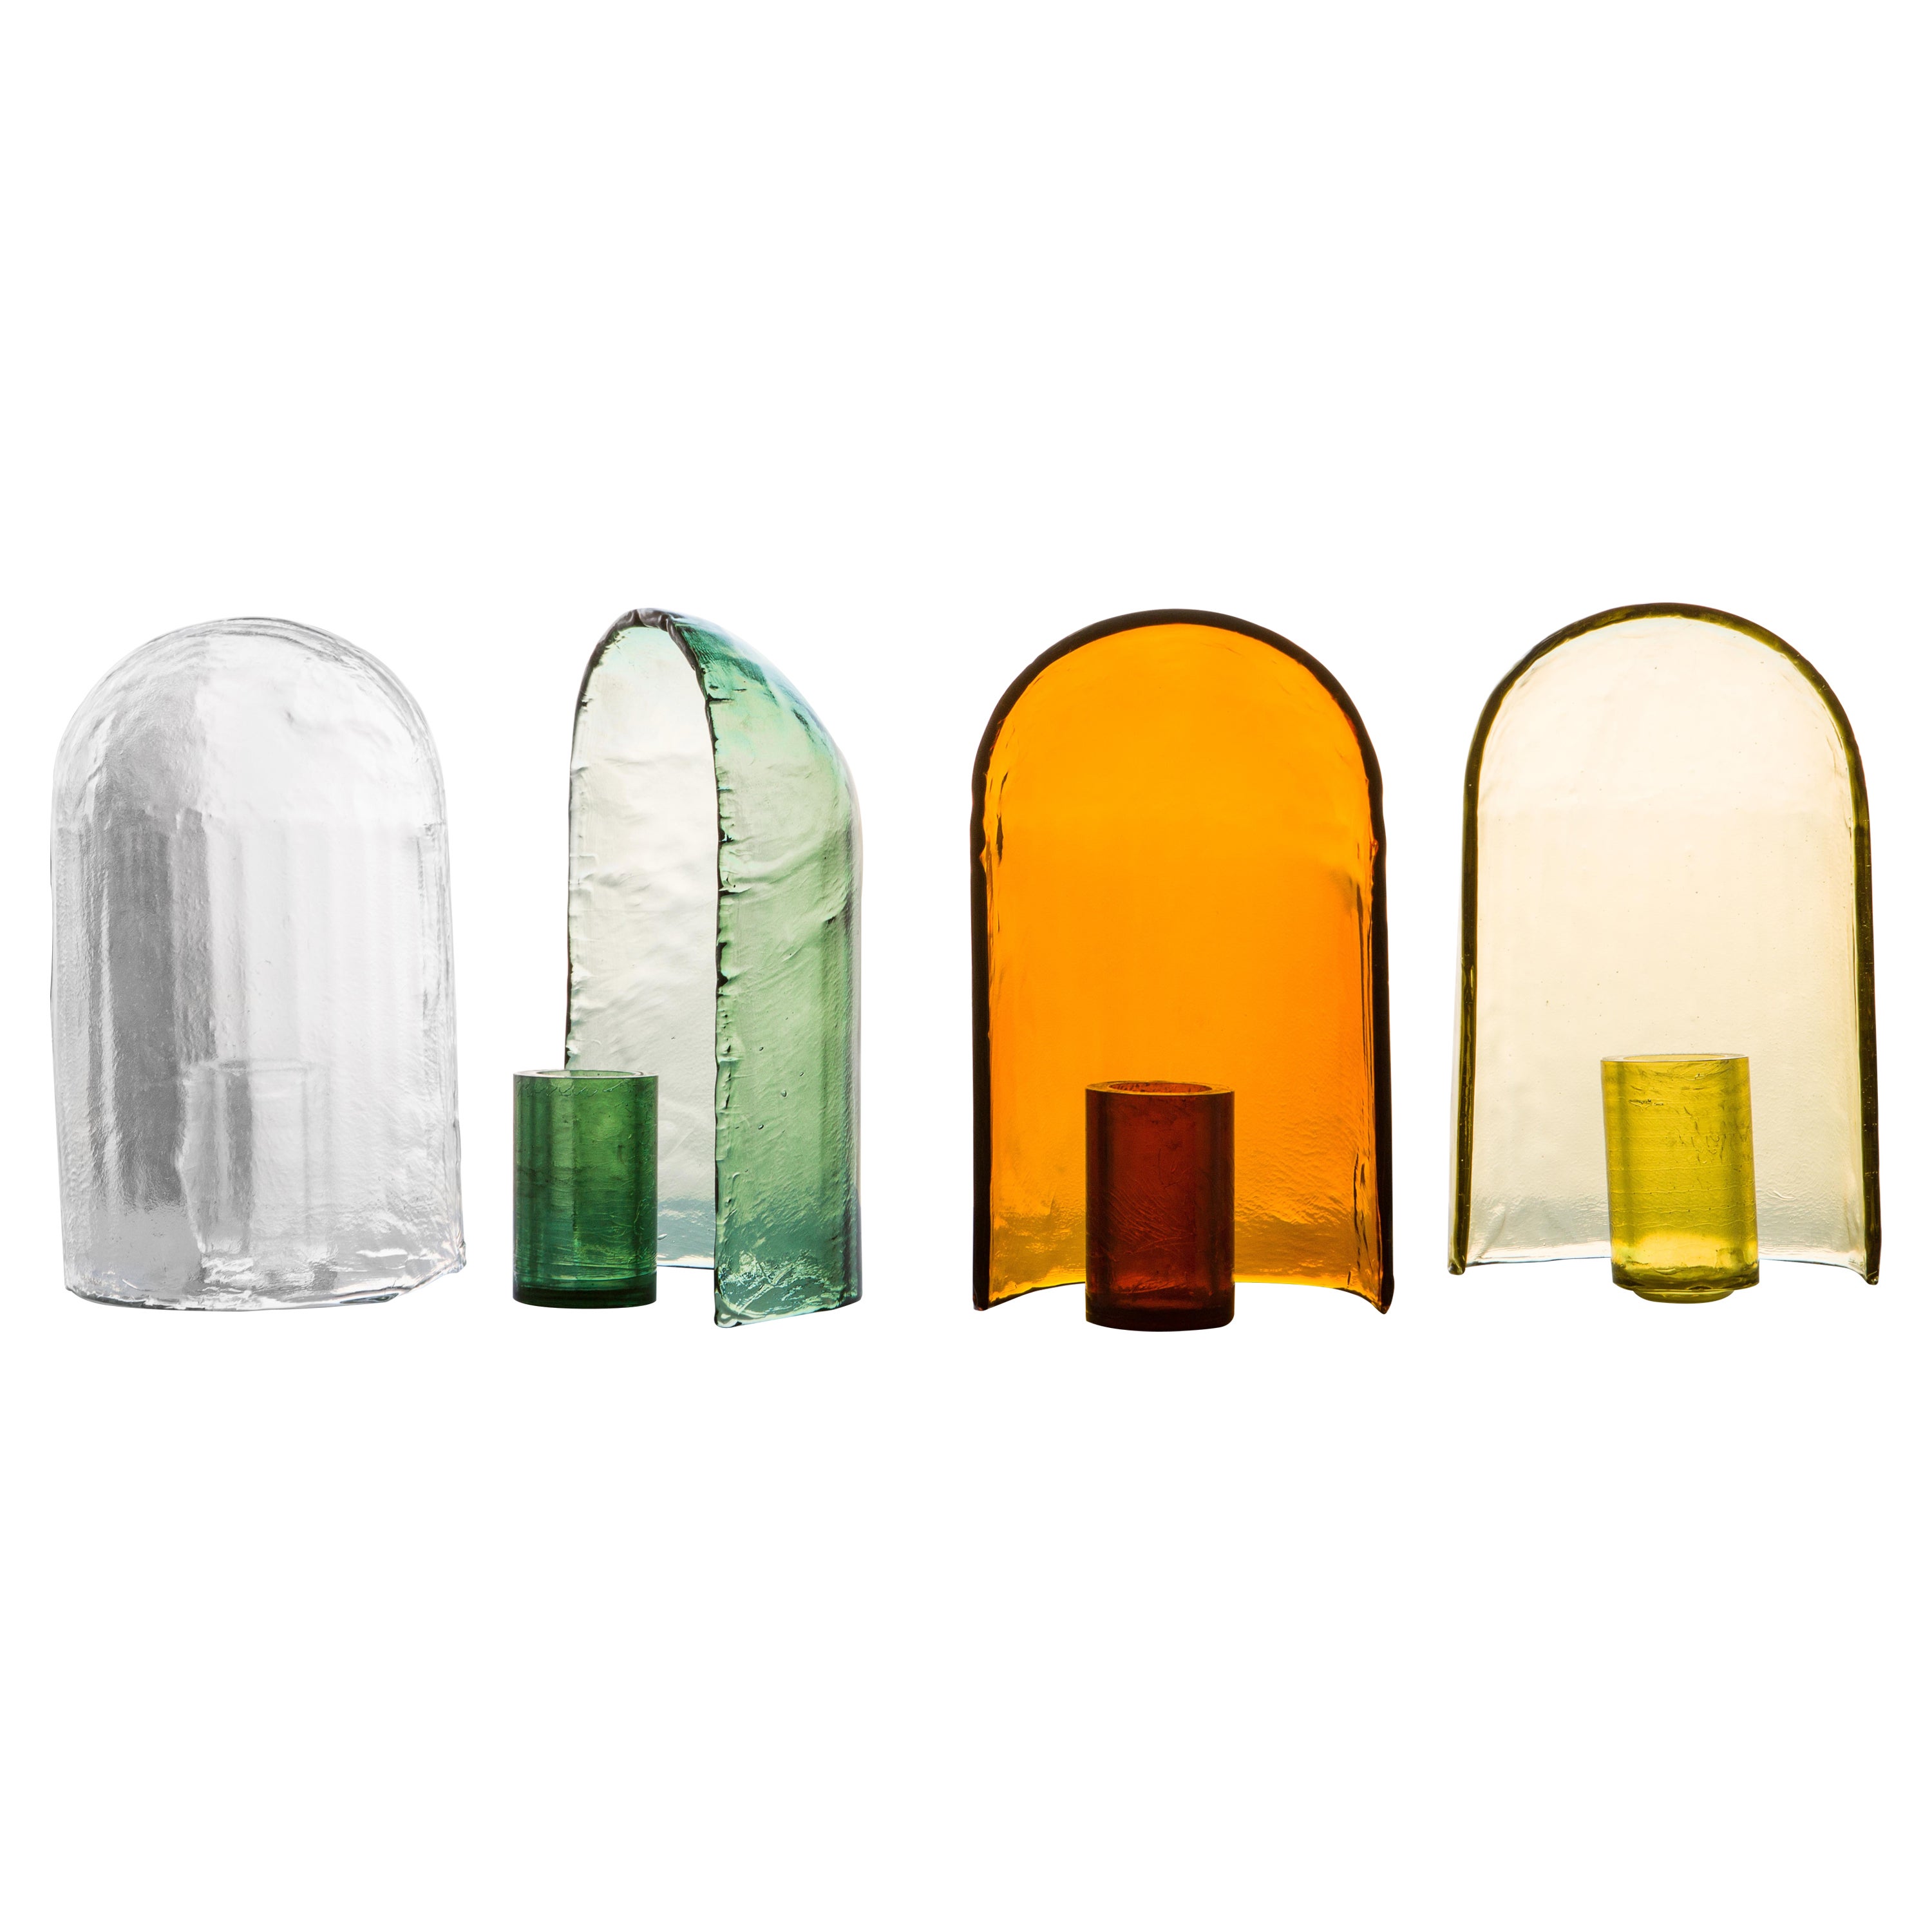 Alcova SET 04
1 x Alcova Amber
1 x Dritto Tall Crystal
1 x Vaso L Crystal
2 x Cilindro L Green

Alcova is a collection of handcrafted, geometric objects that when grouped create intimate landscapes. Ronan and Erwan Bouroullec describe the